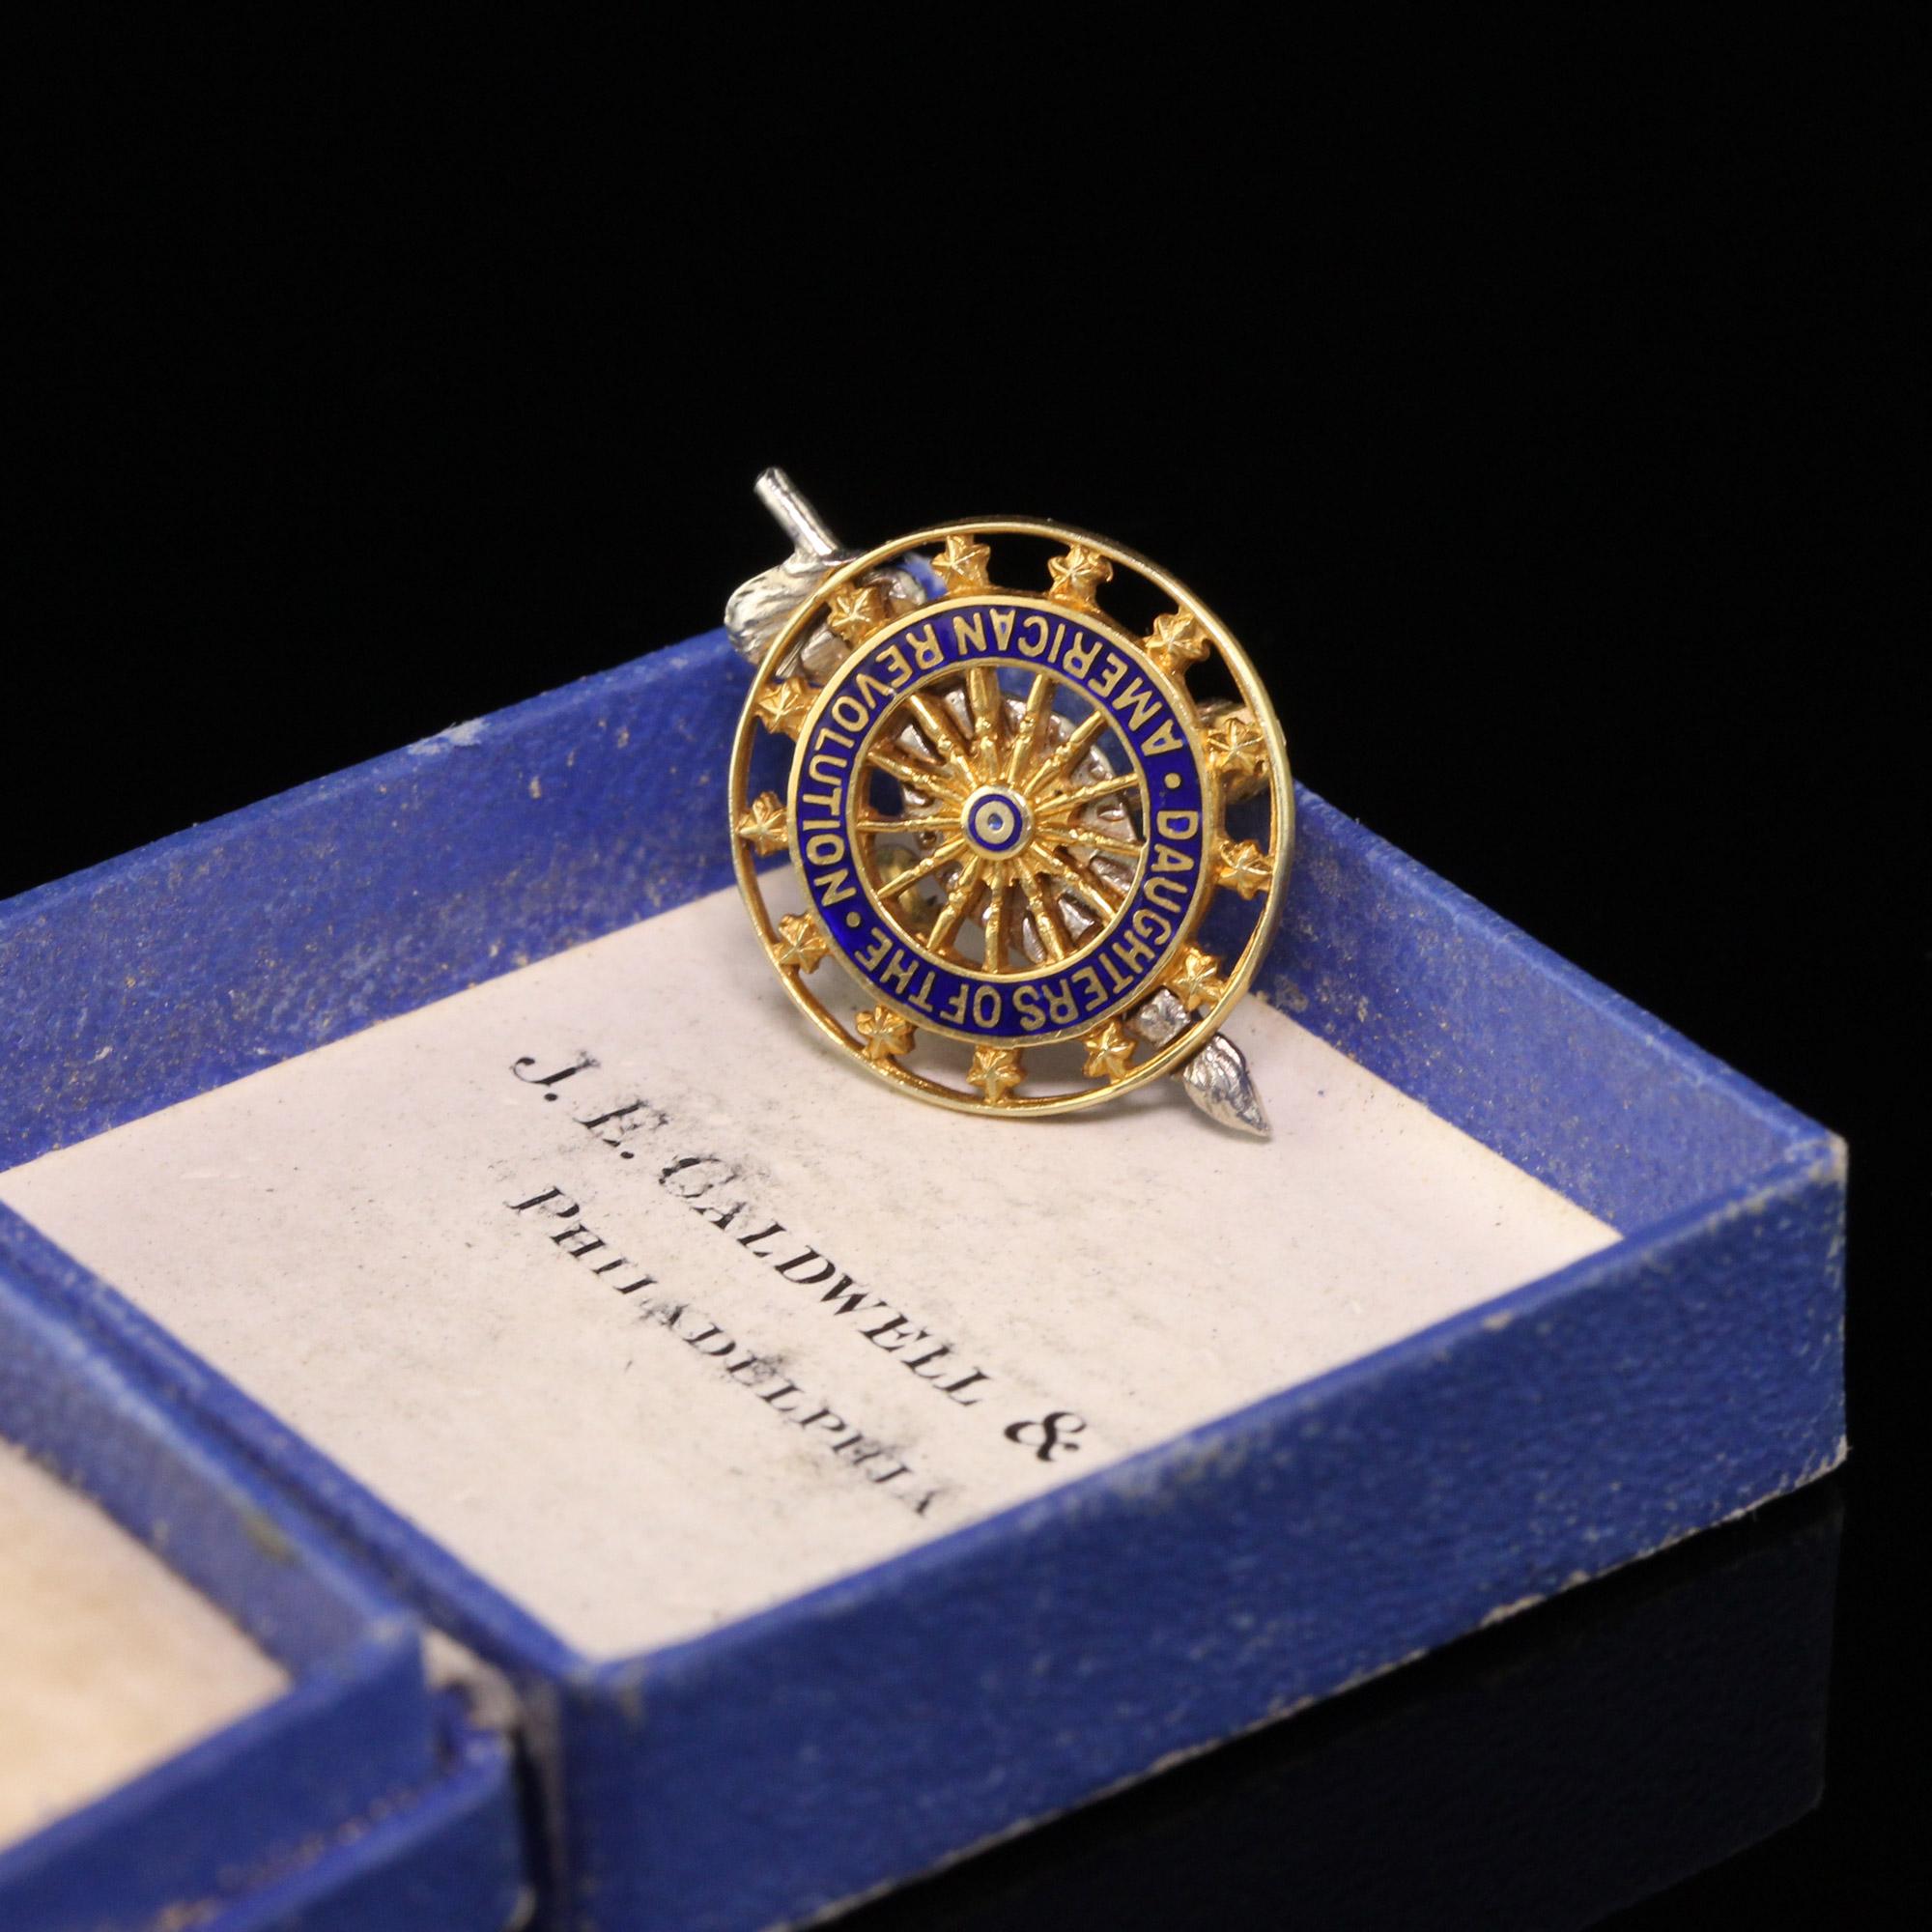 Gorgeous J.E. Caldwell & Co Antique 14K Yellow Gold Enamel Daughters of the Revolution Pin. This pin is in great condition and has all the hallmarks of J.E. Caldwell including its original box.

Item #P0105

Metal: 14K Yellow Gold and White